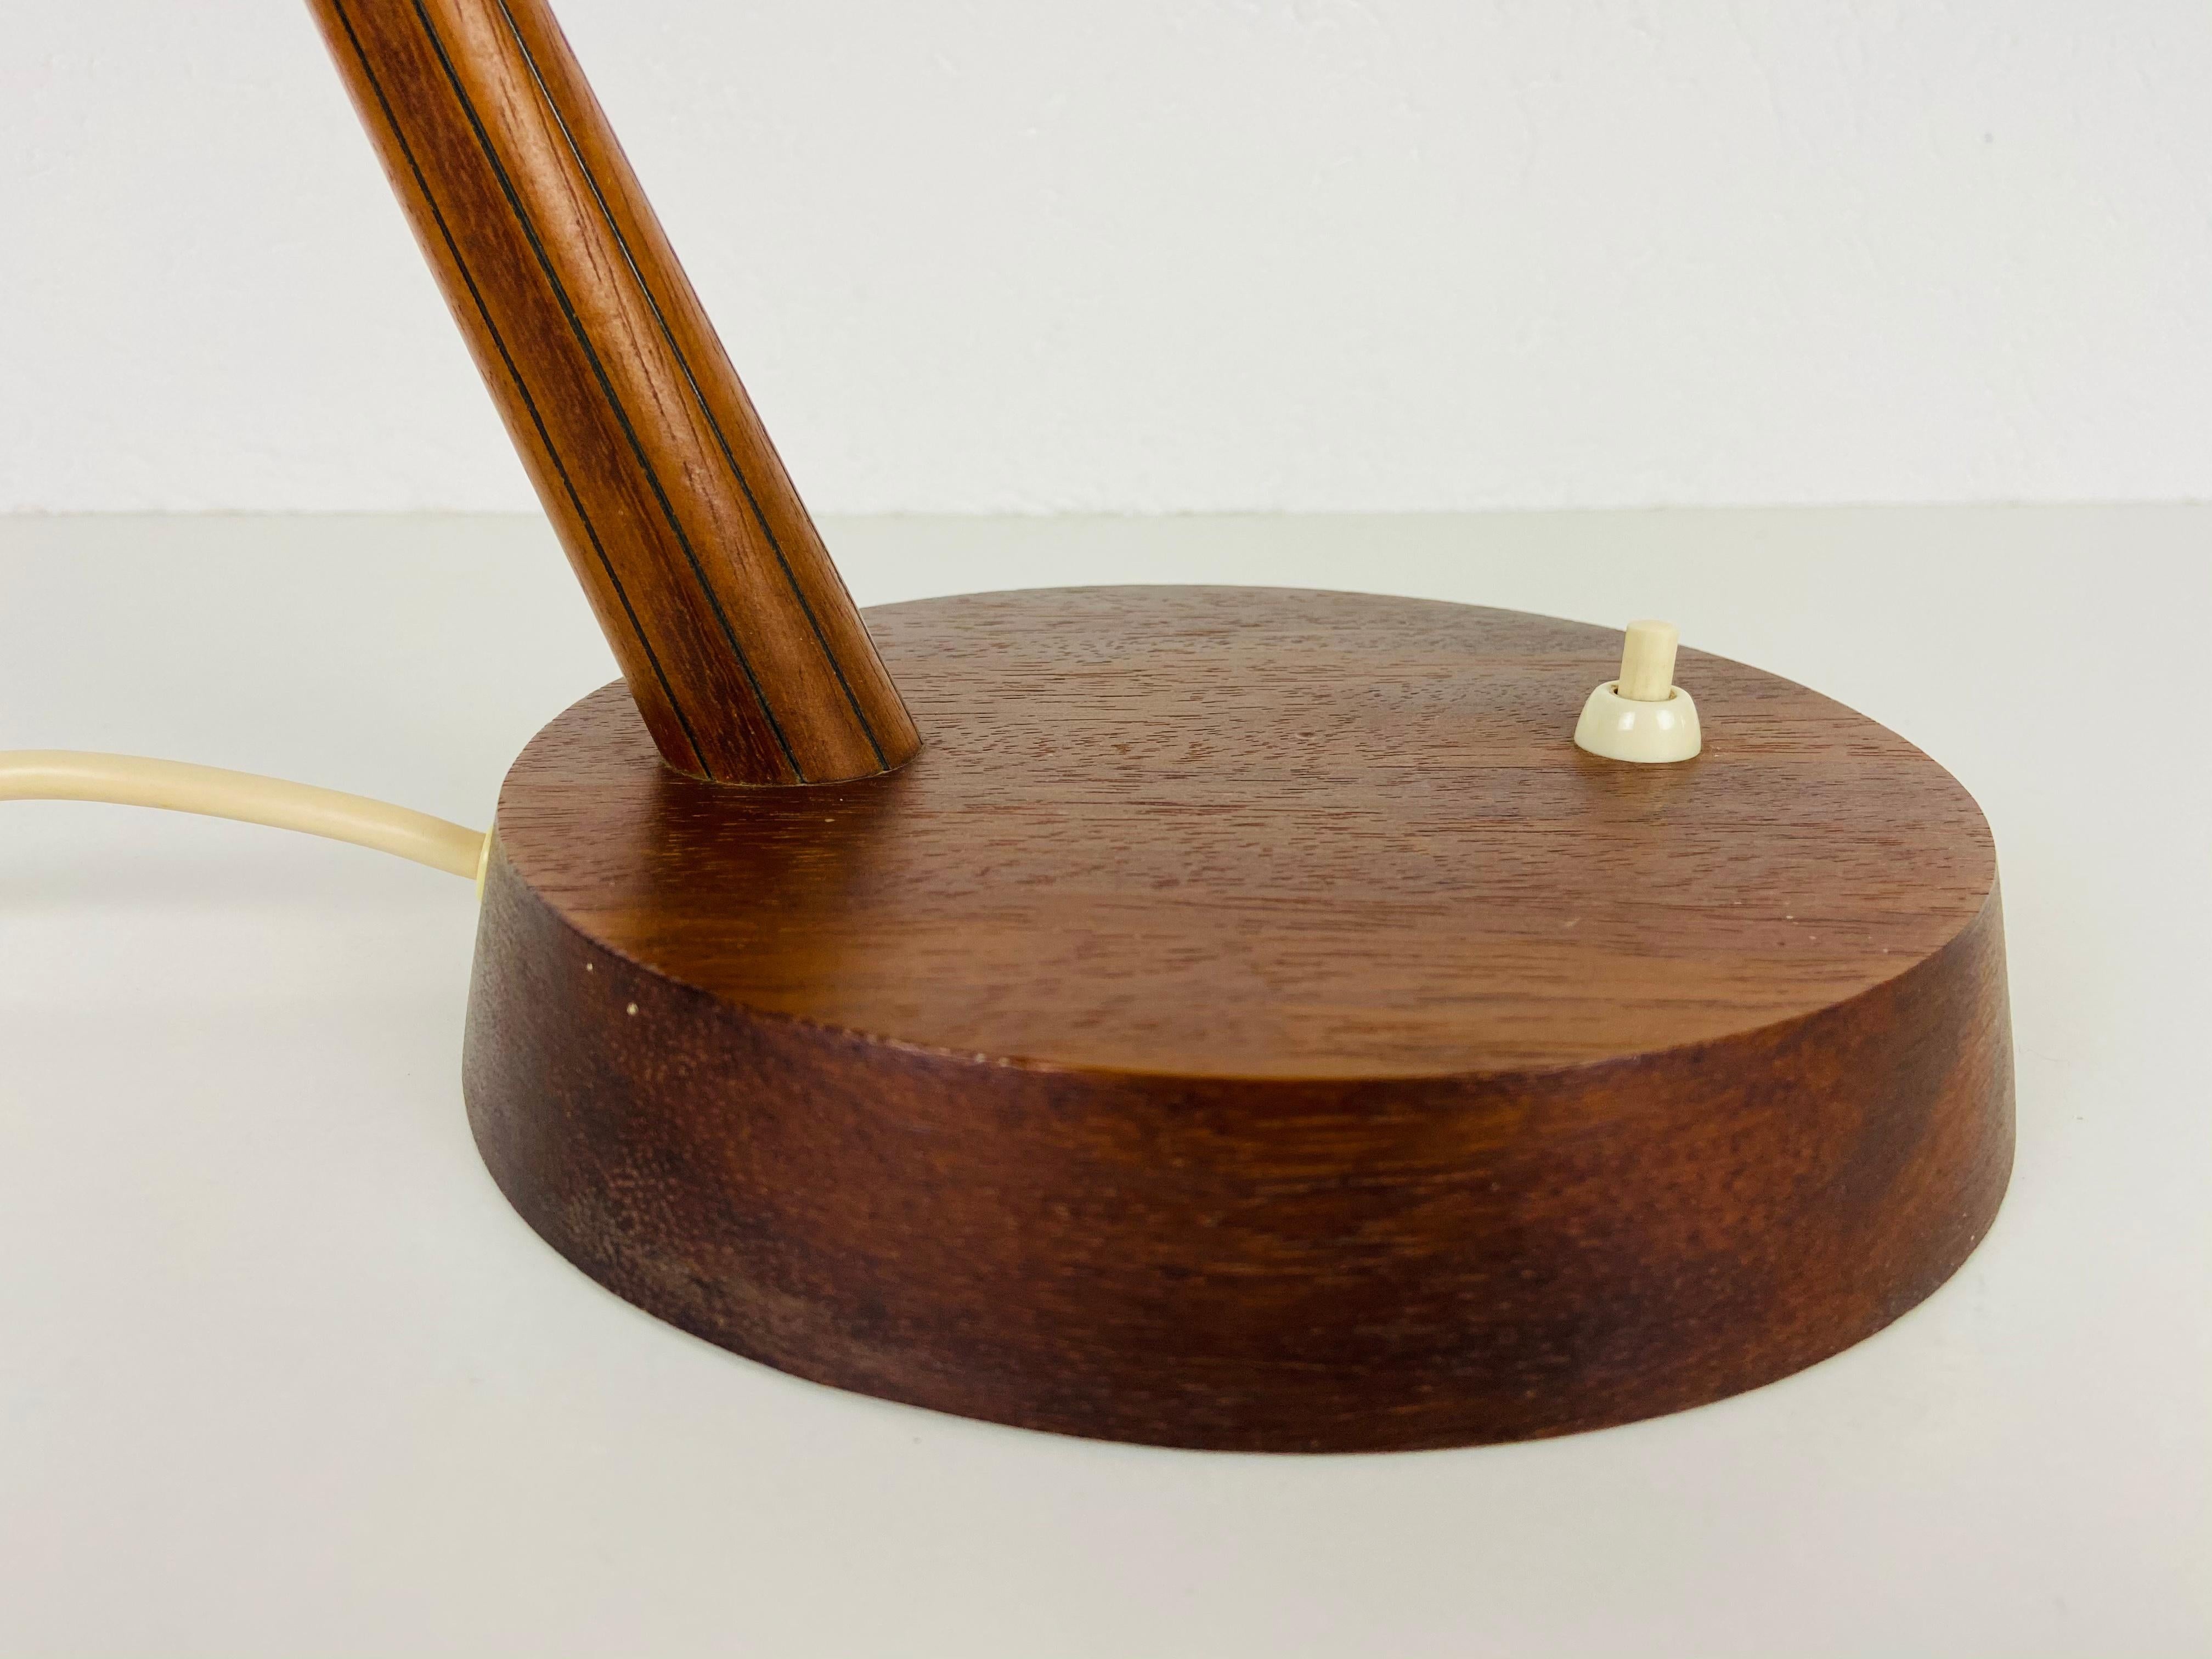 Midcentury Teak and Rattan Table Lamp by Temde, circa 1970 For Sale 3